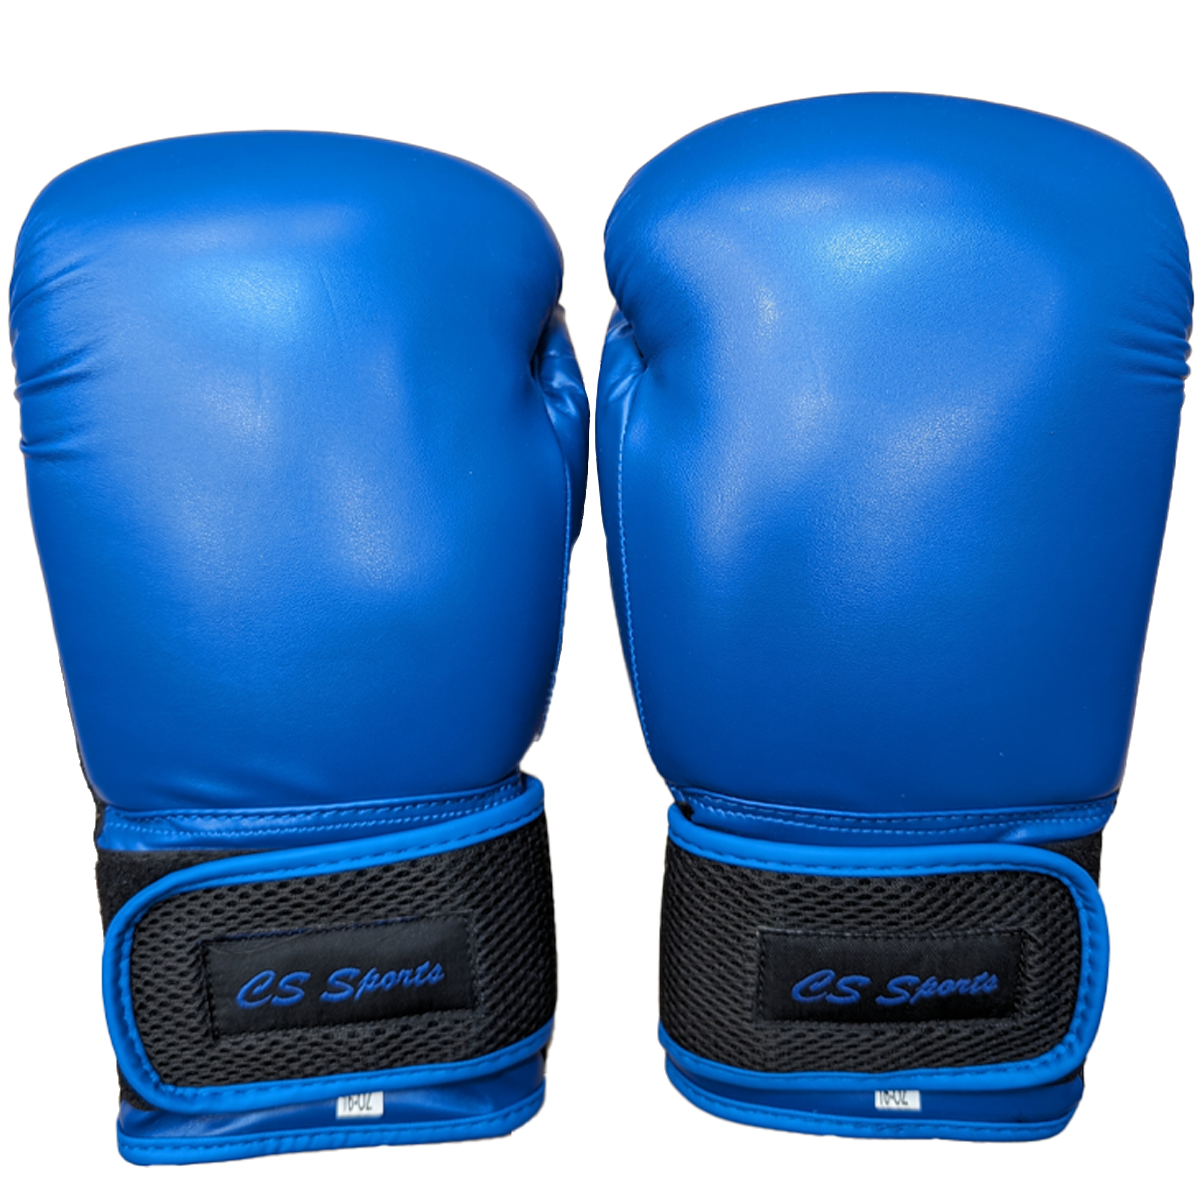 CS Sports Leather Training Boxing Gloves